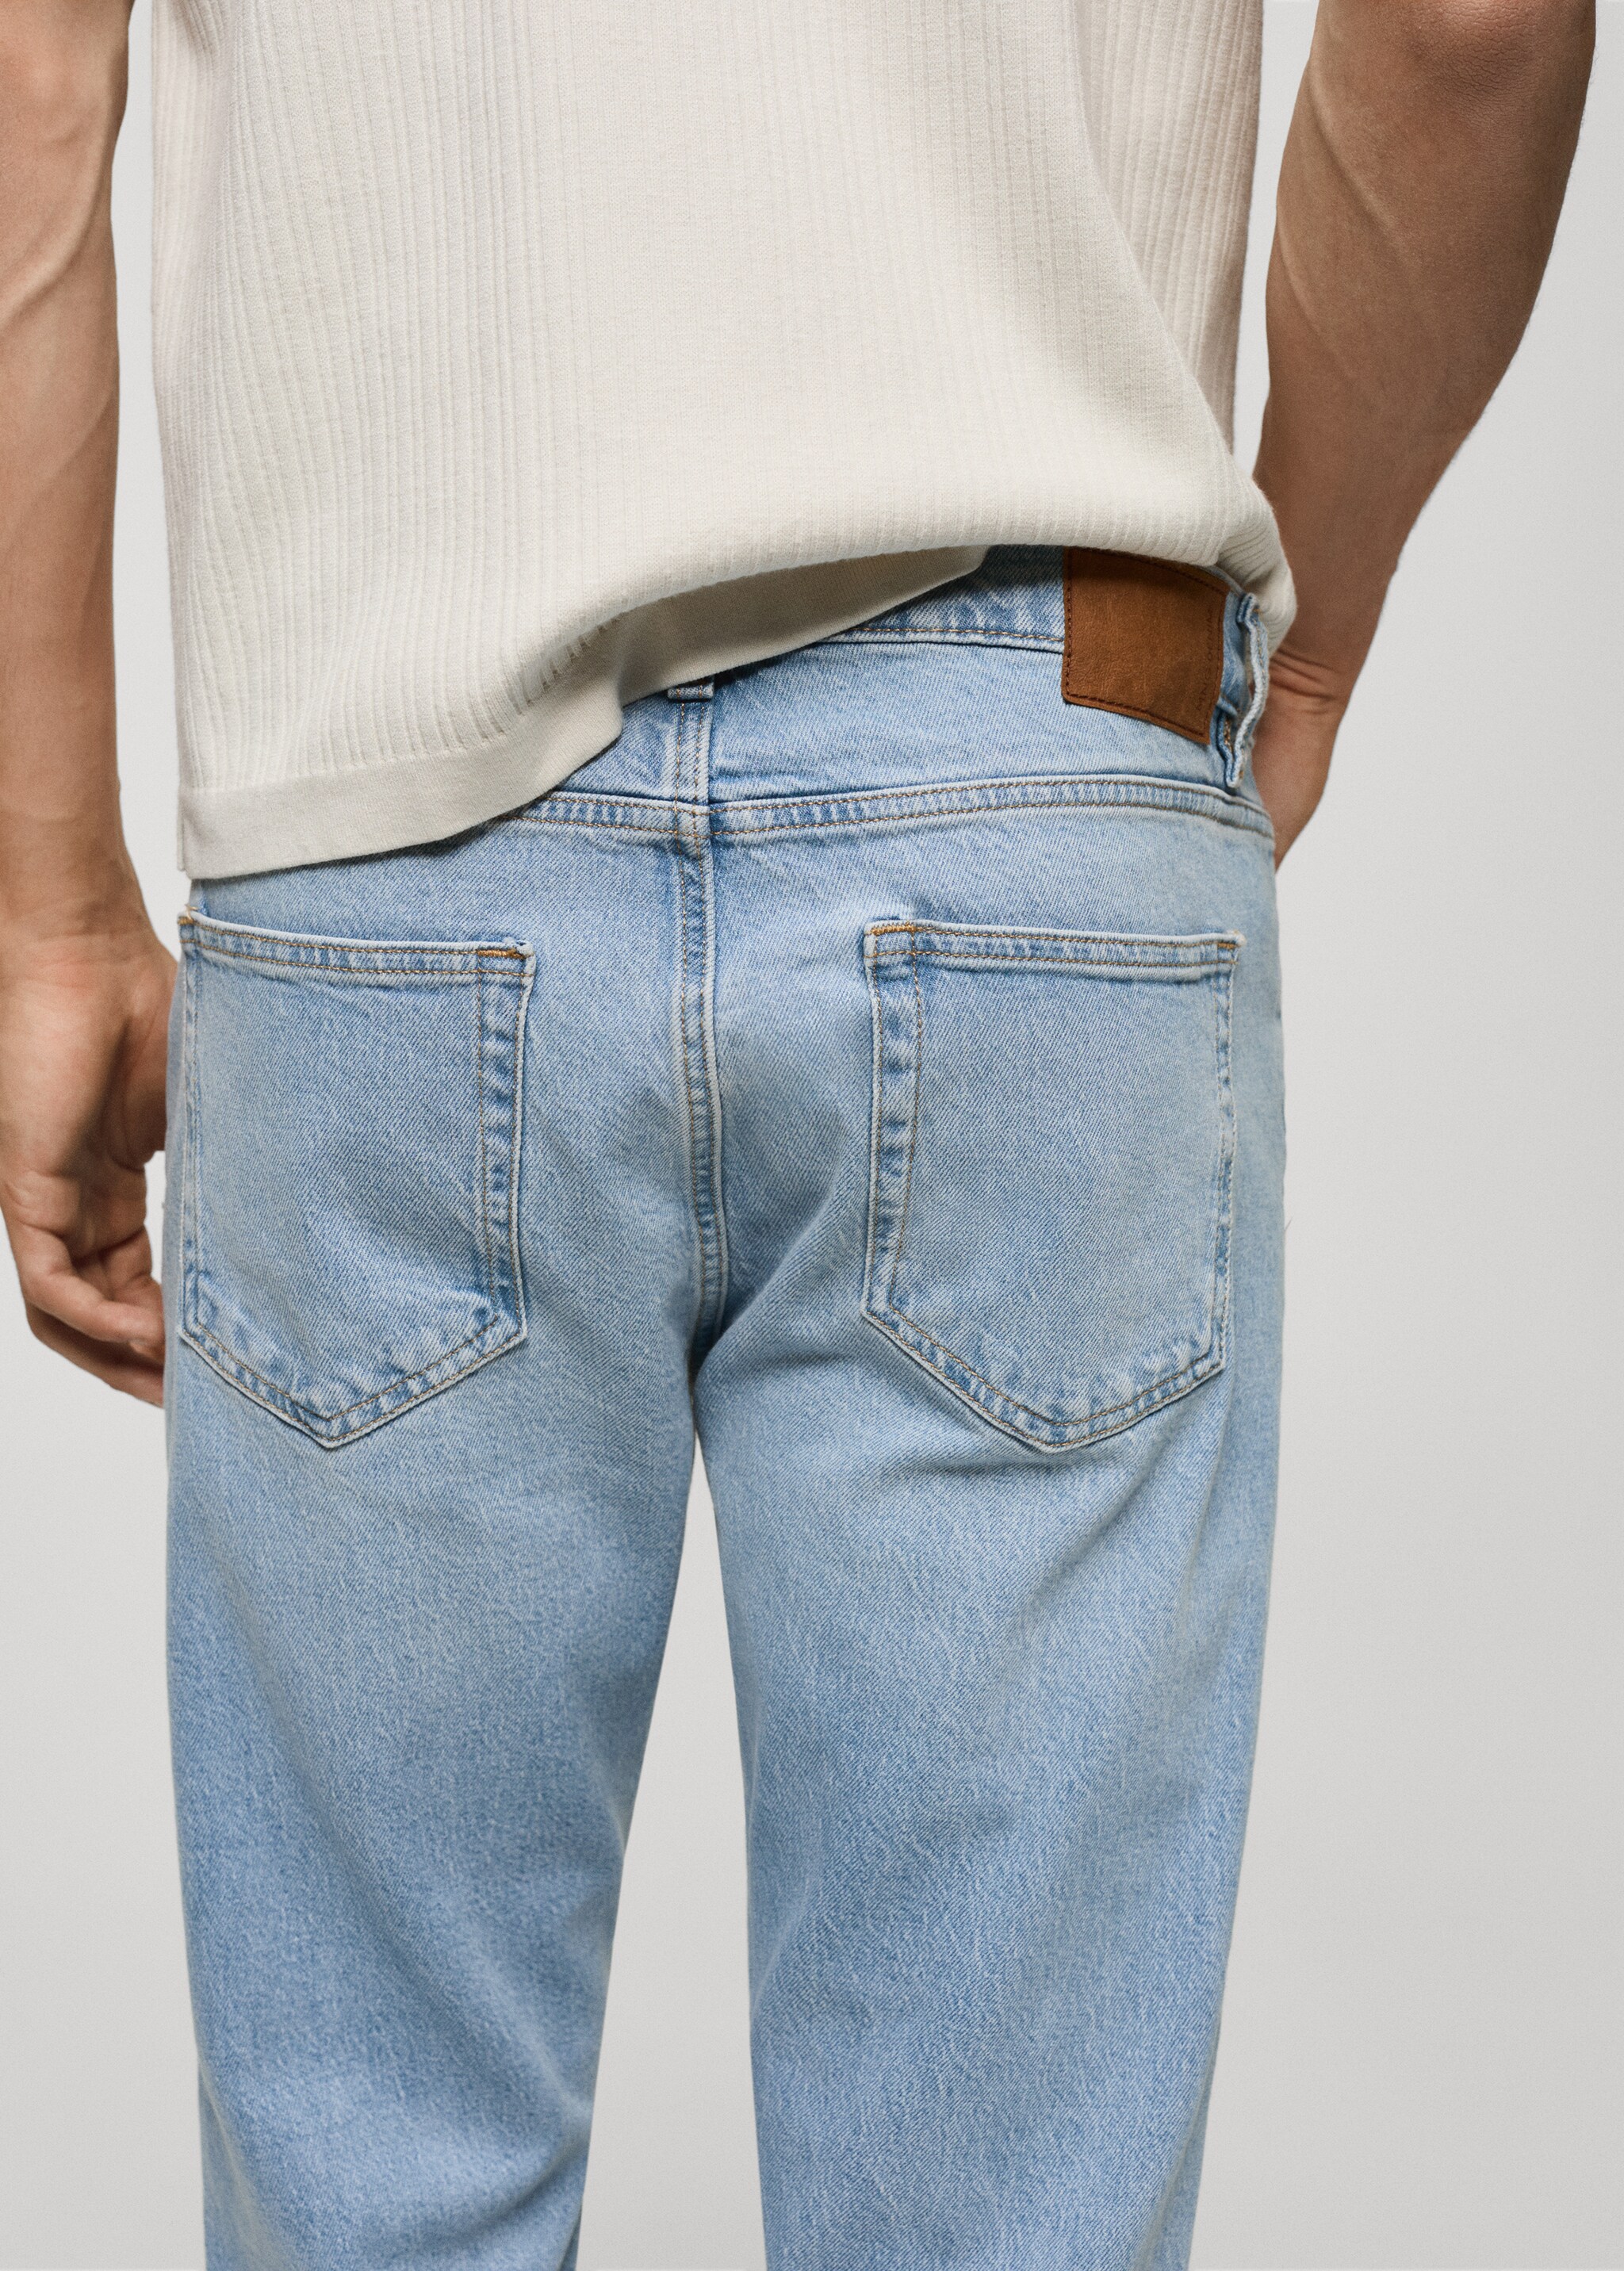 Ben tapered fit jeans - Details of the article 4